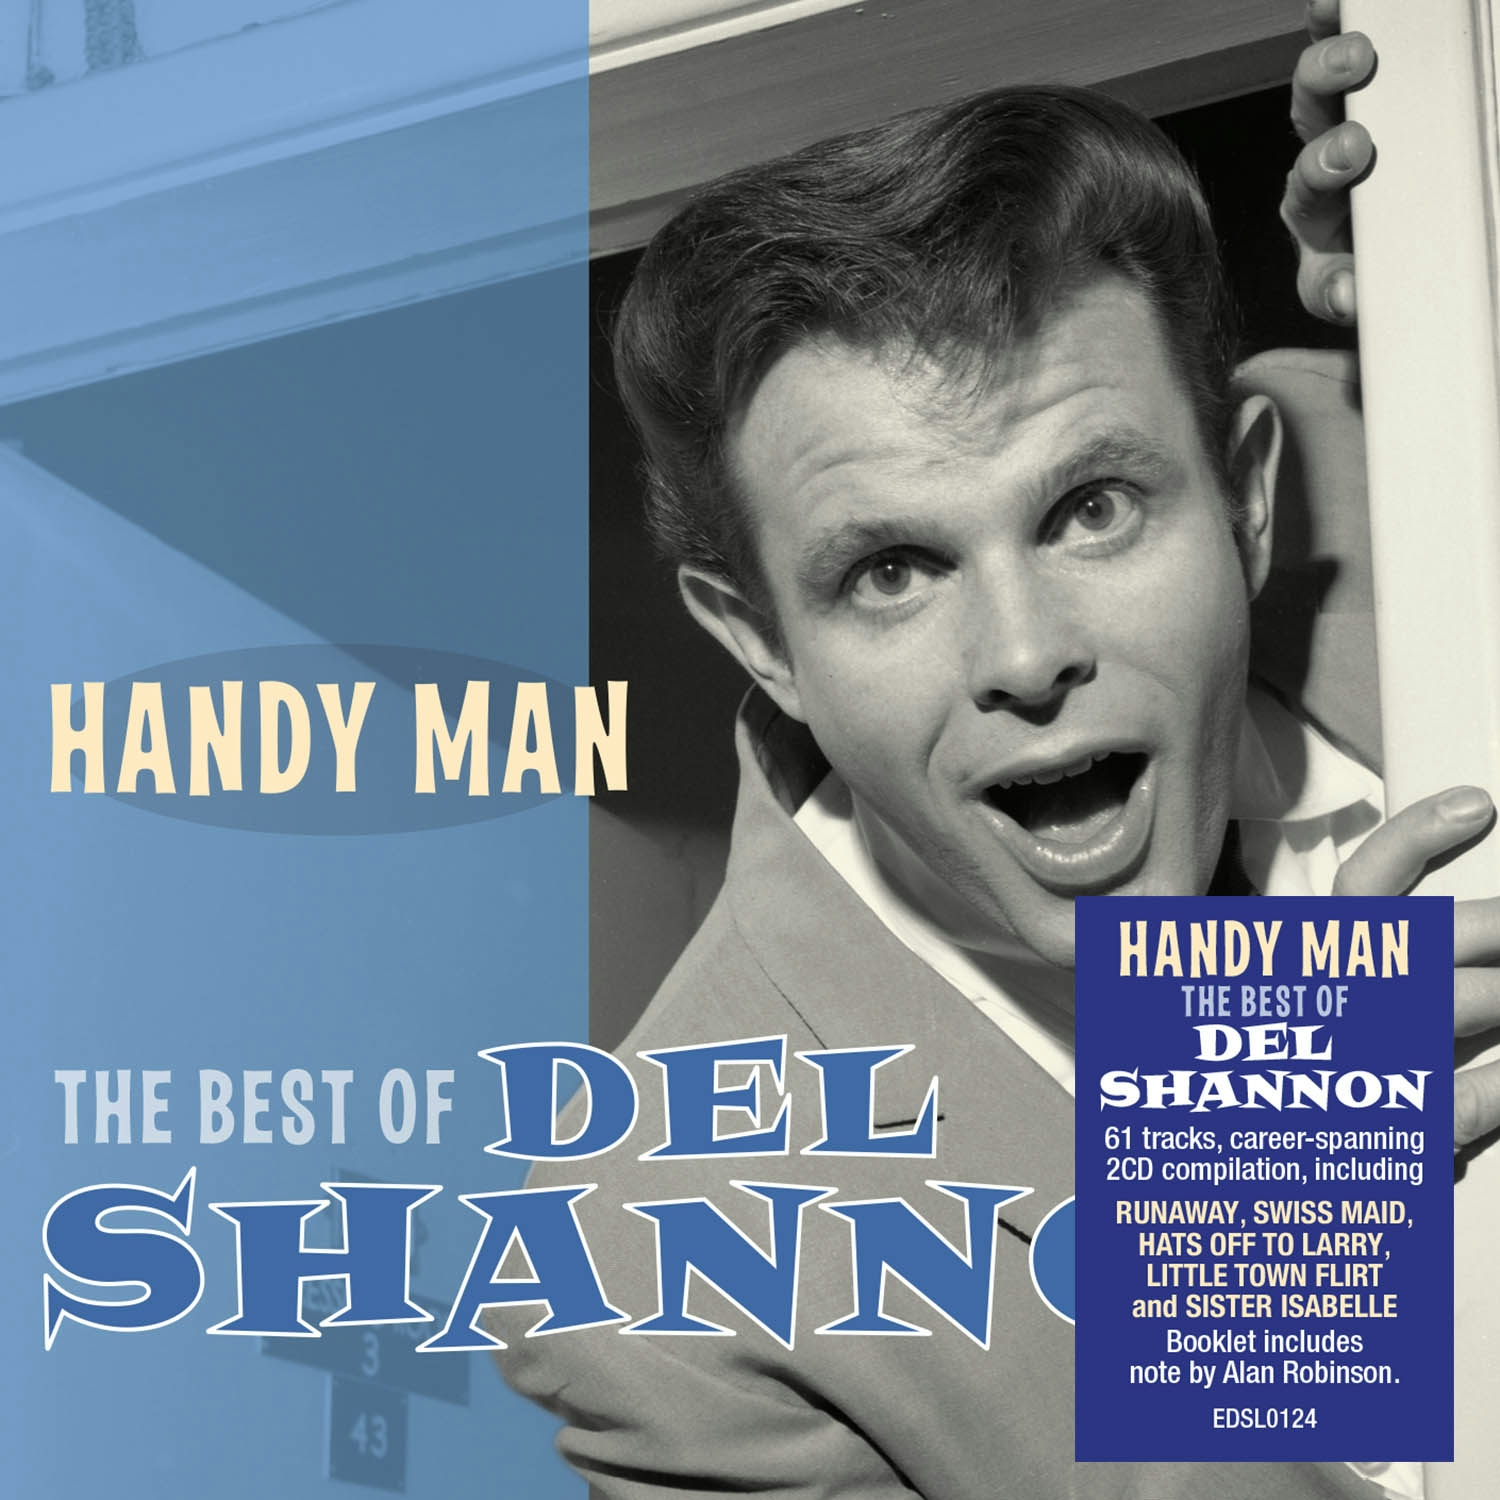 Album artwork for Handy Man - The Best Of by Del Shannon